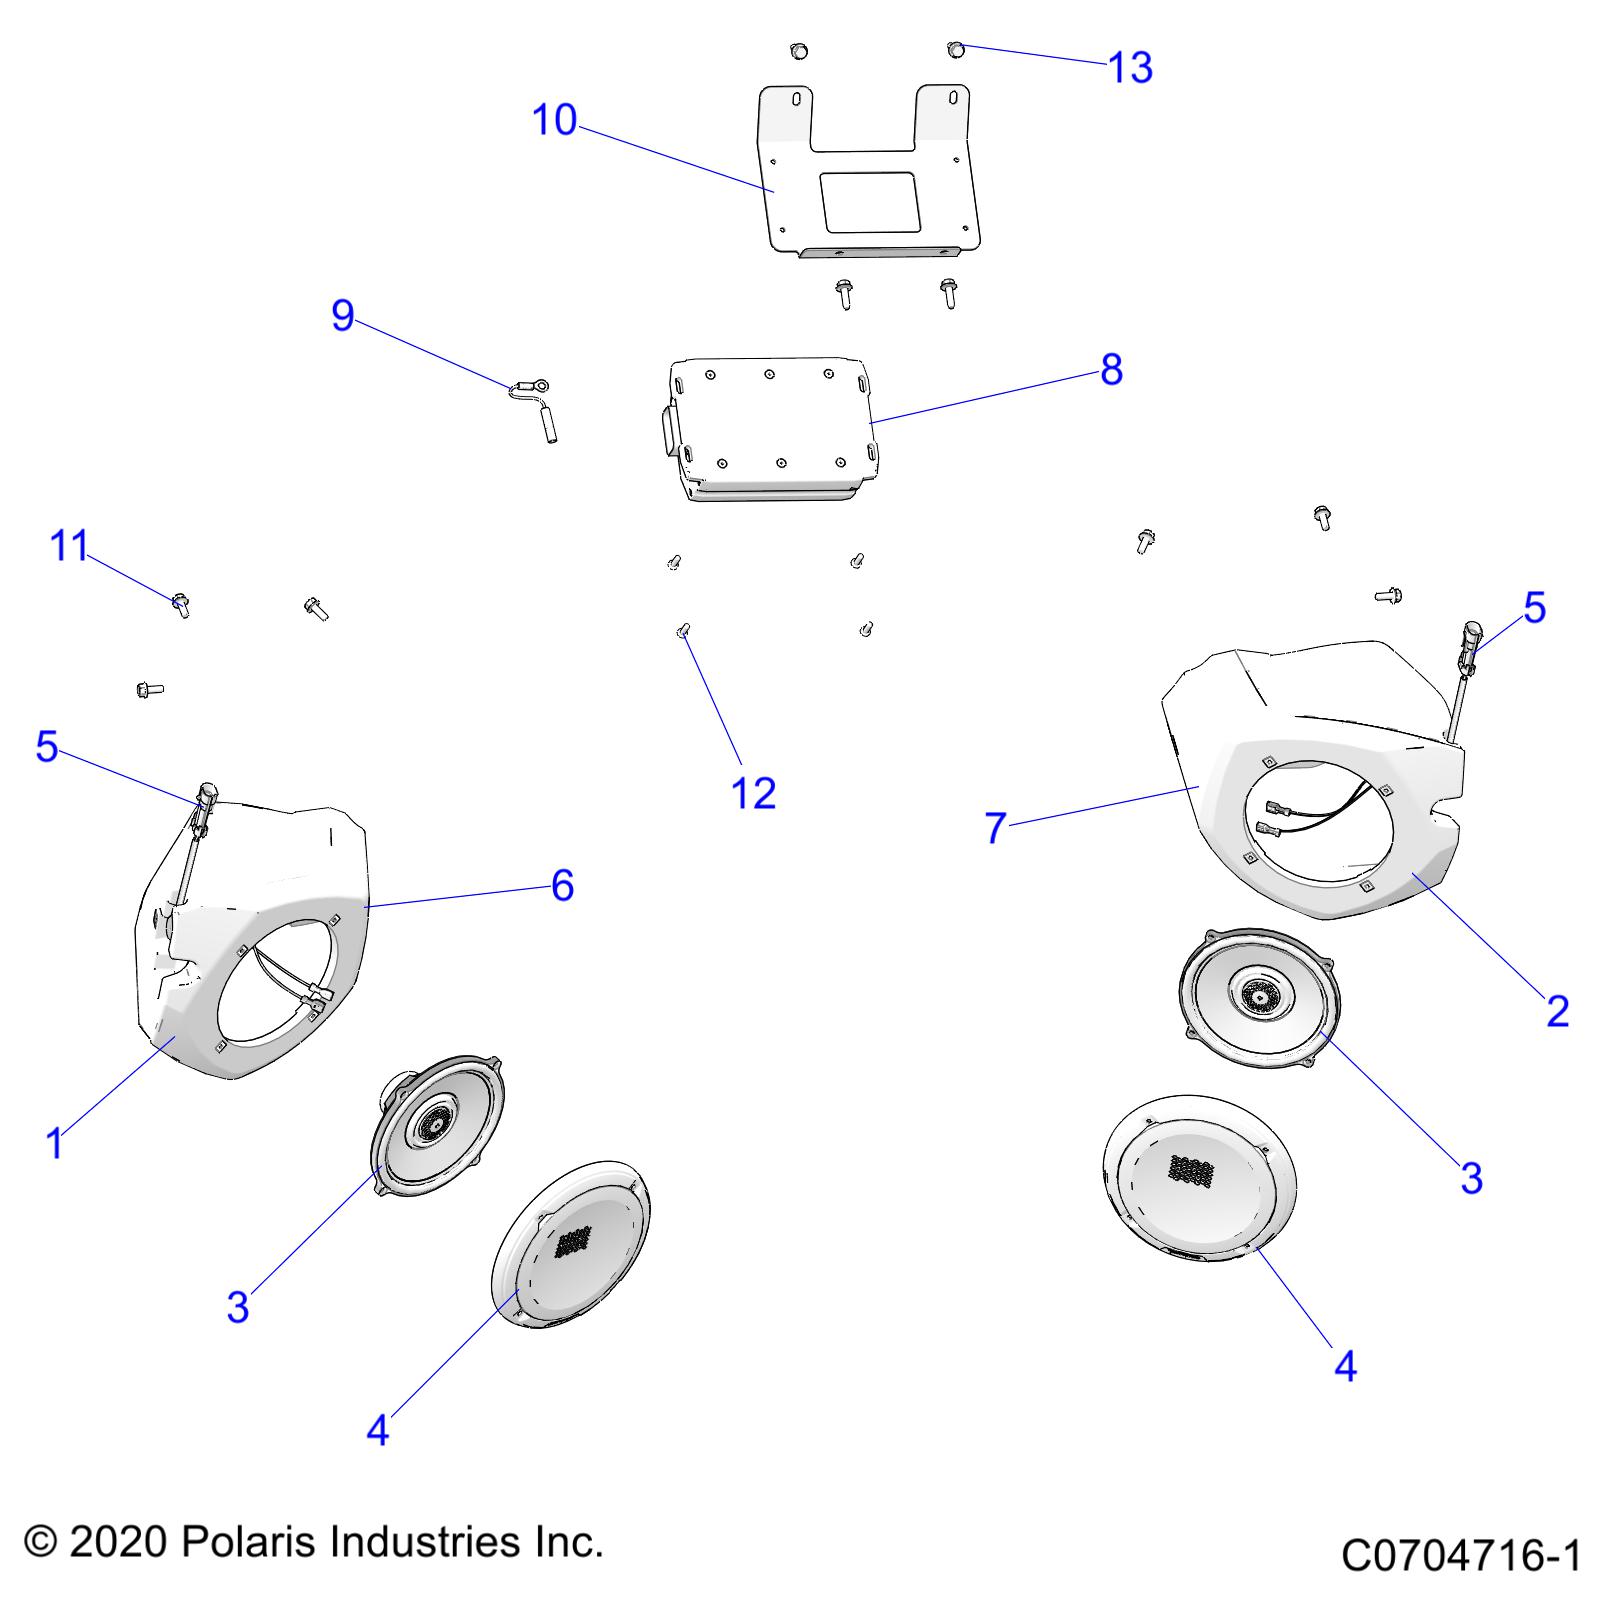 Part Number : 2414537 COAXIAL ASSEMBLY